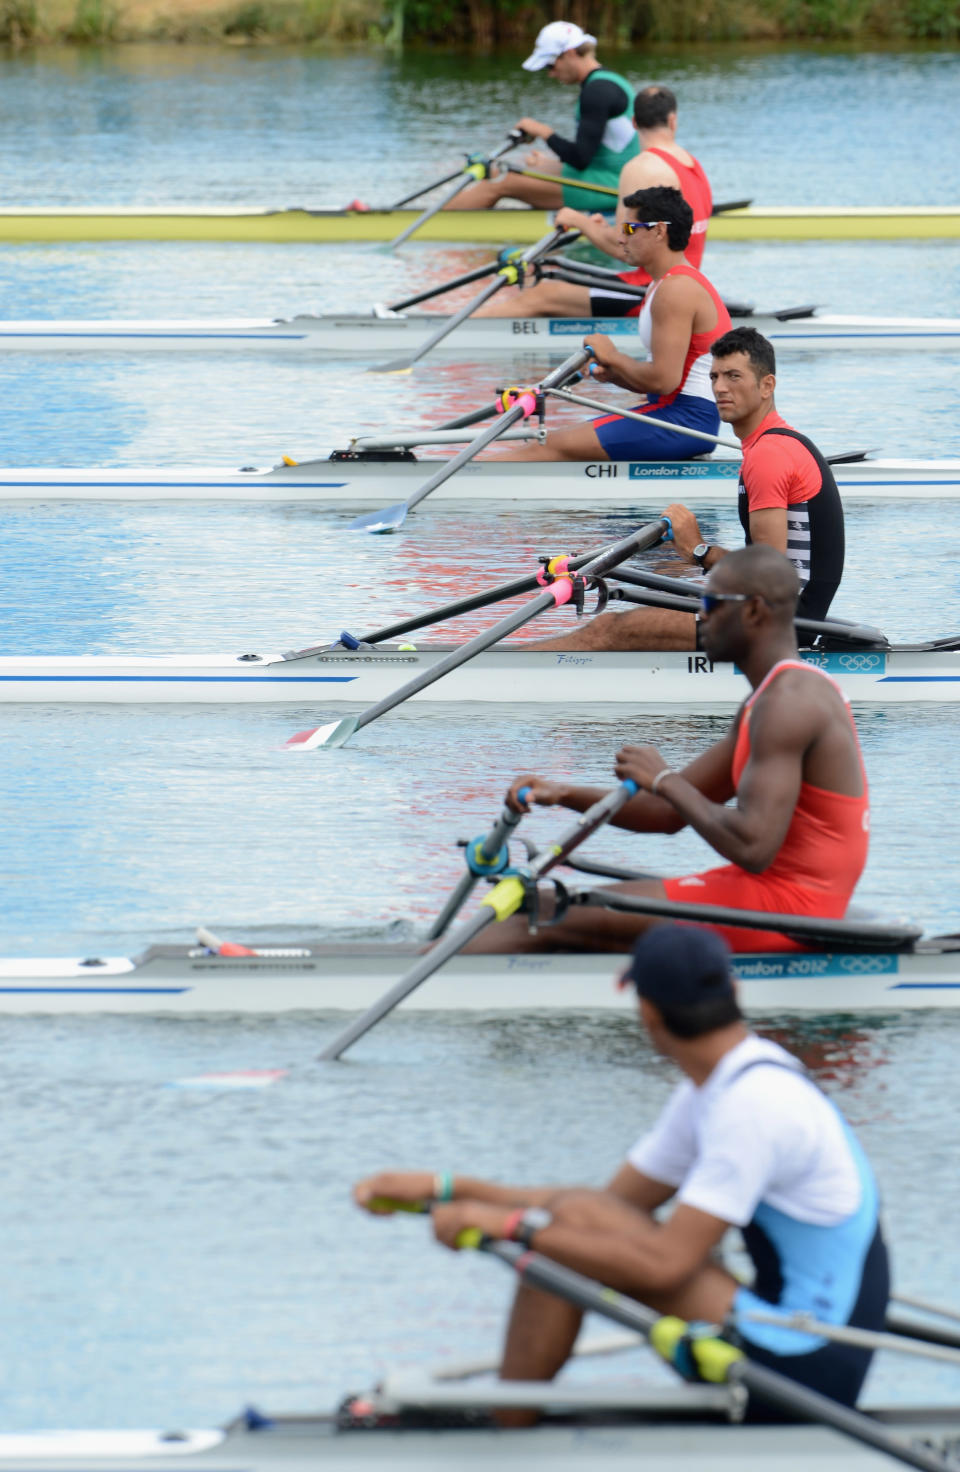 Olympics Day 1 - Rowing